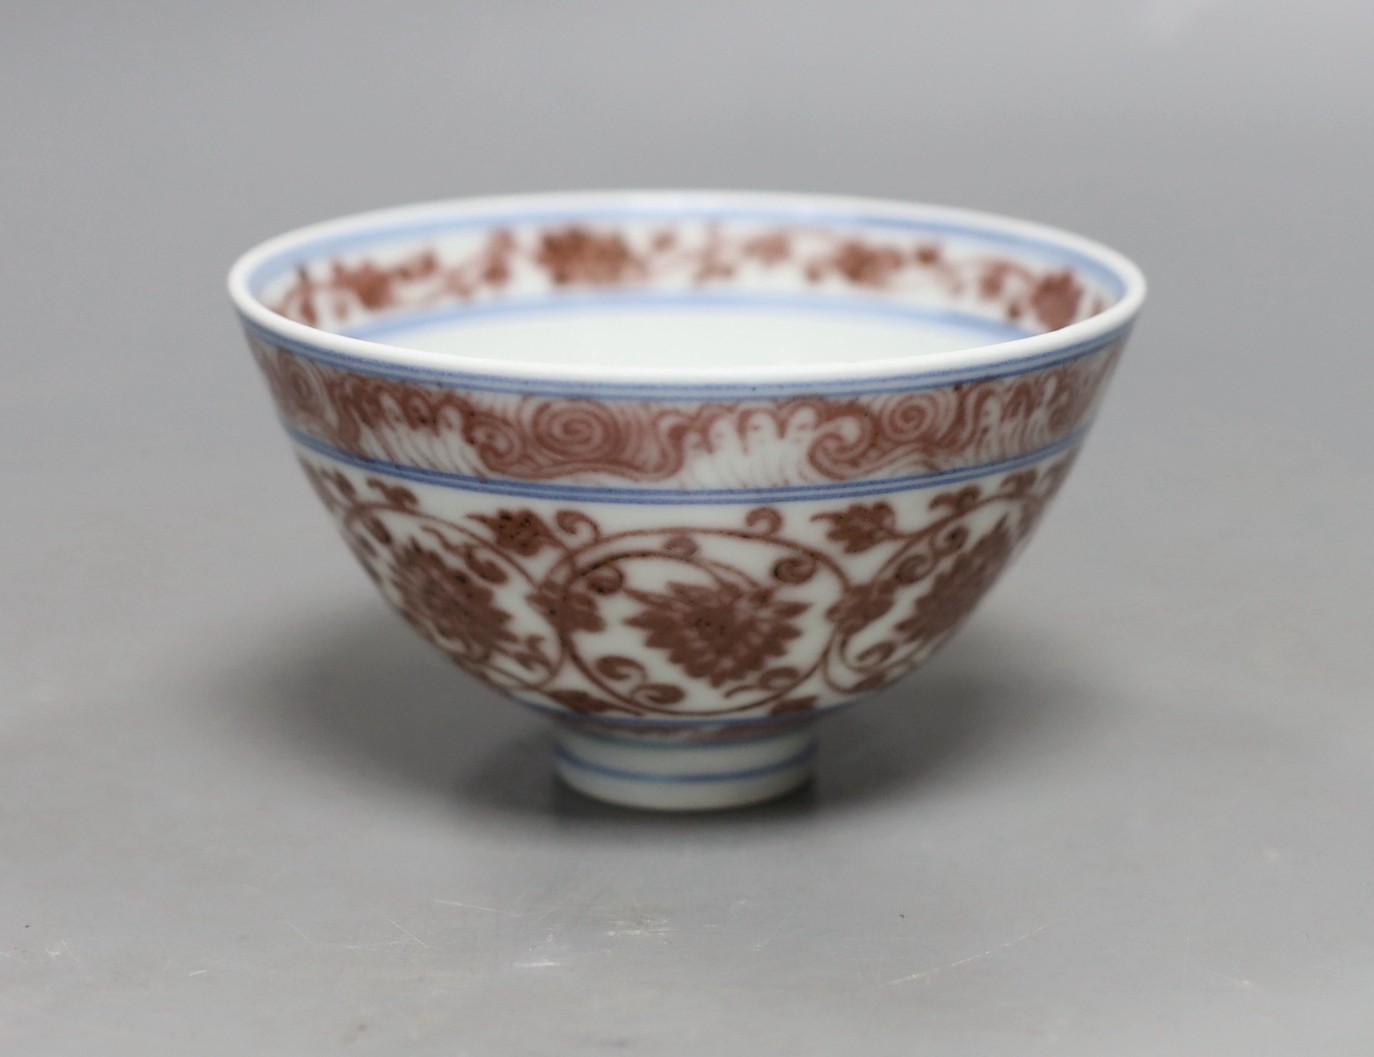 A small Chinese underglaze copper red bowl, 7.5cms high